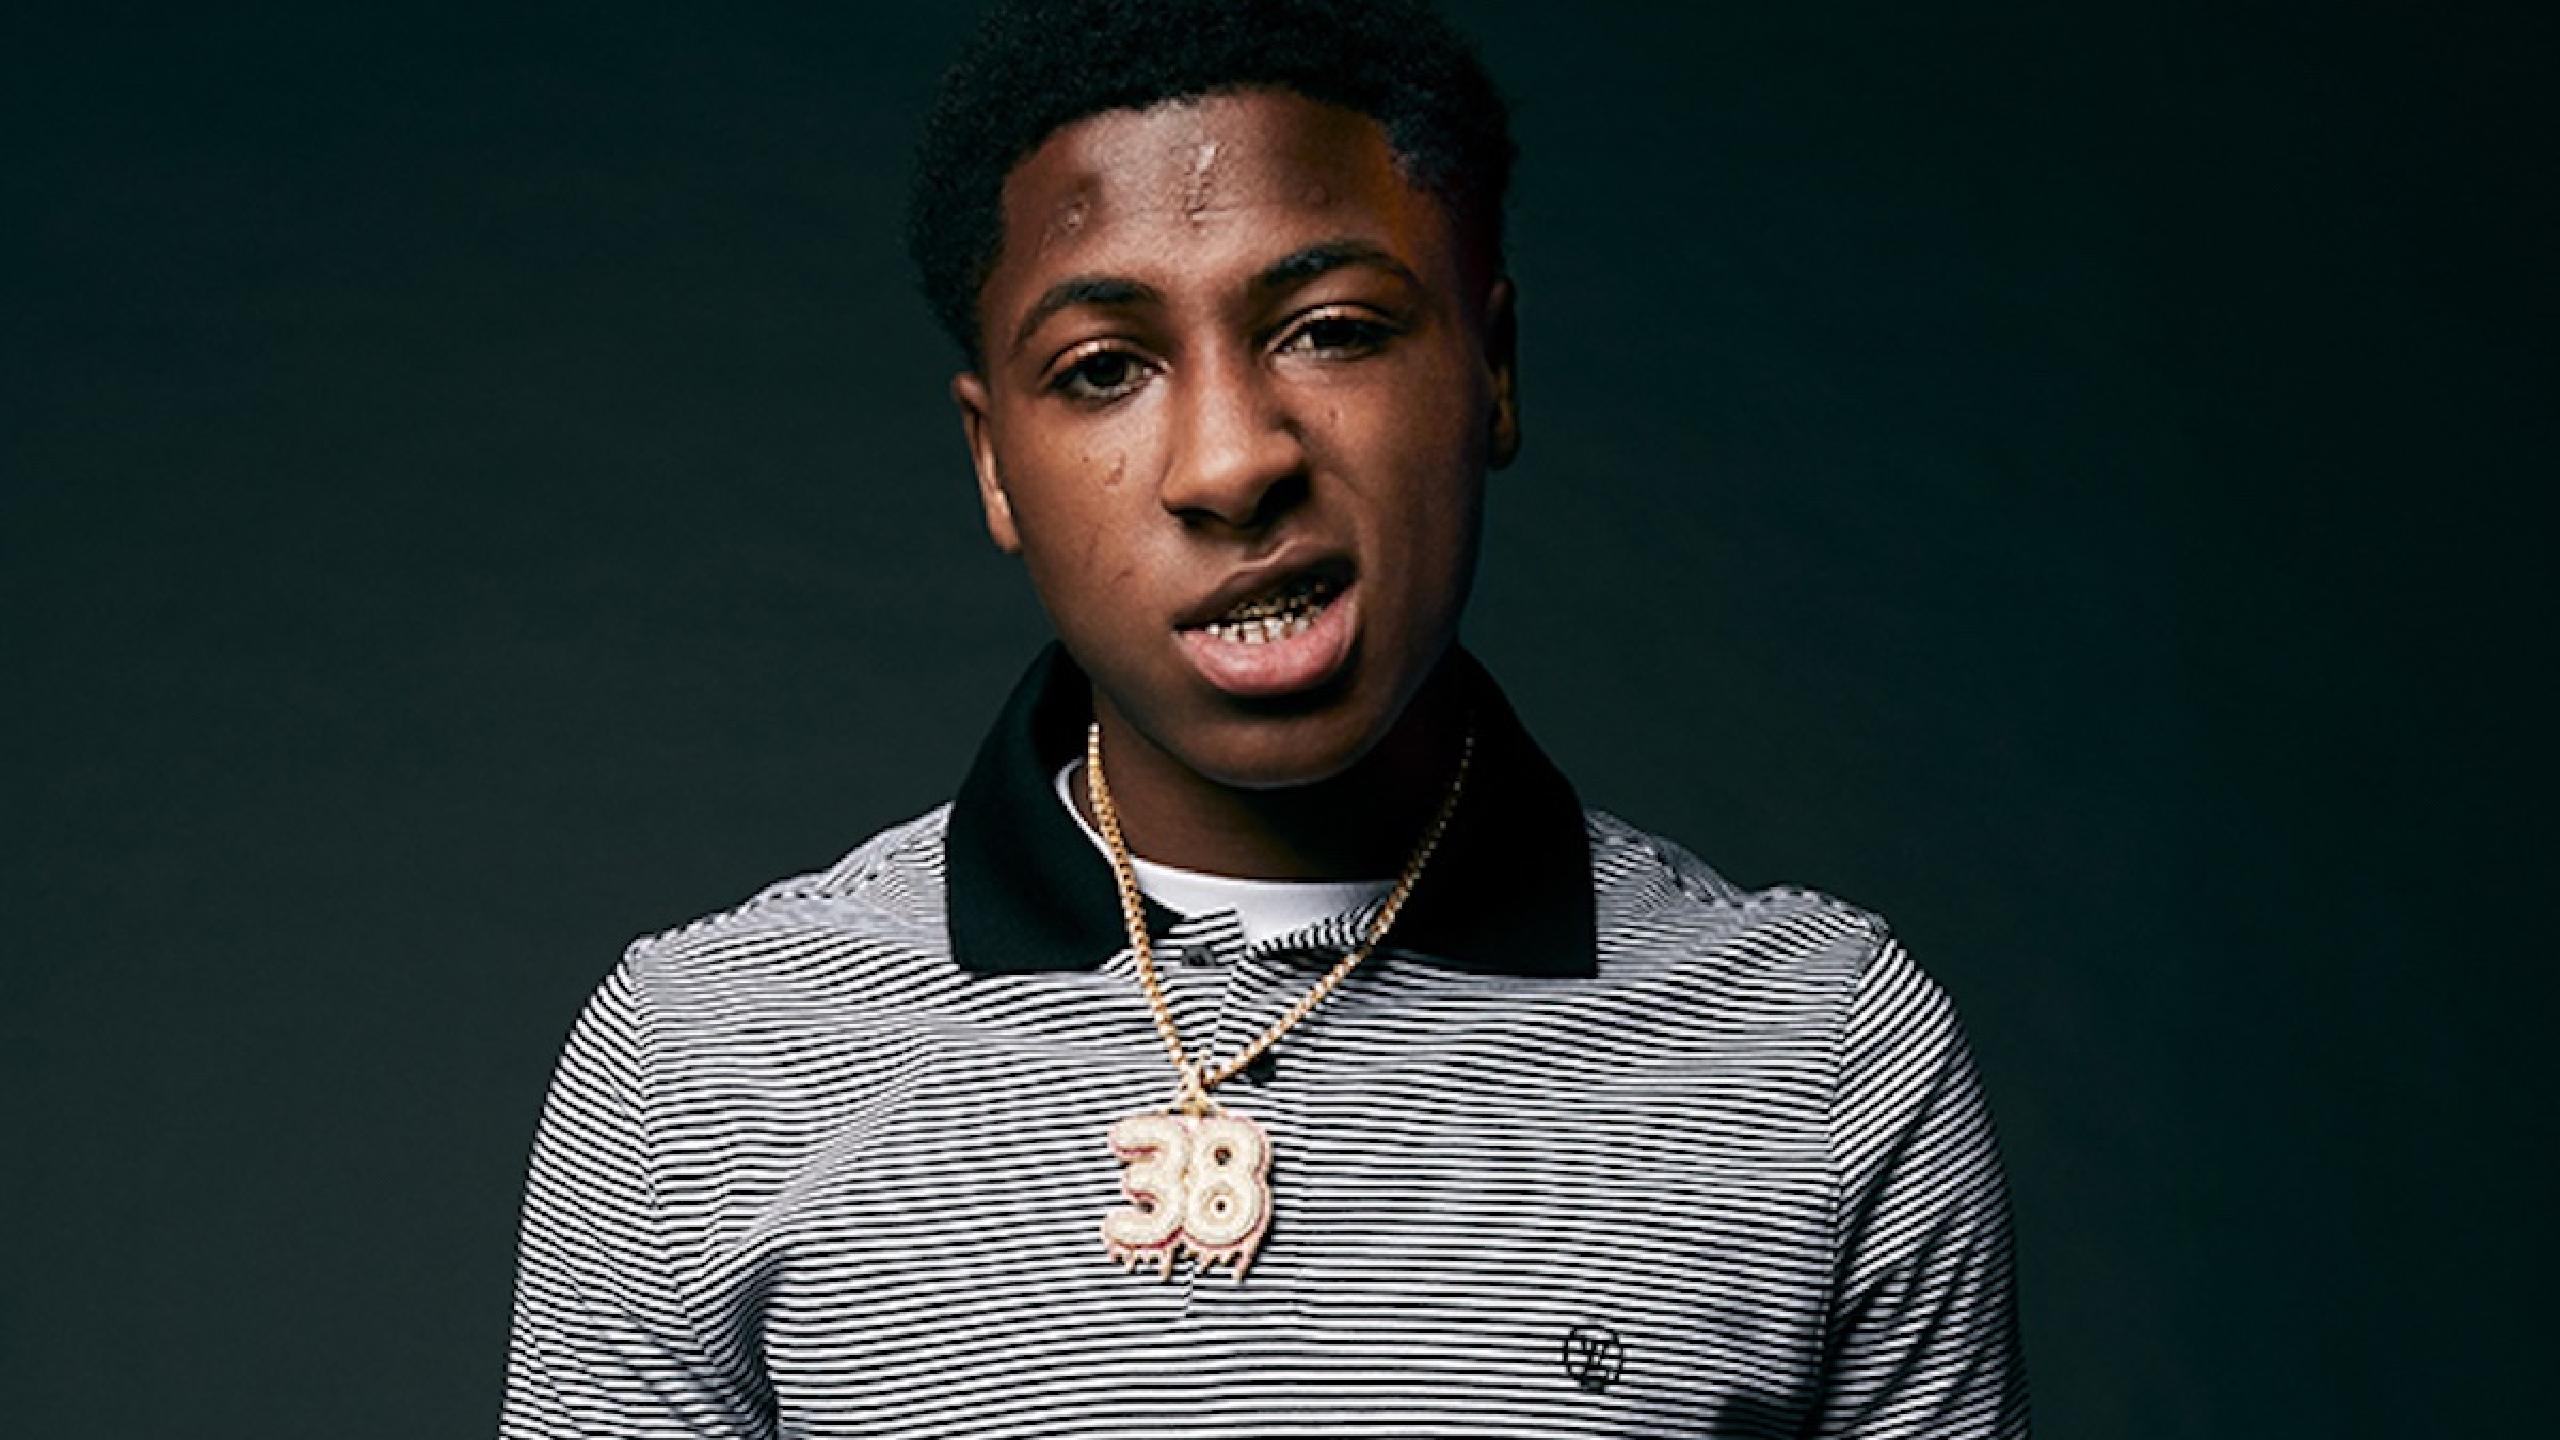 Youngboy Never Broke Again tour dates 2022 2023. Youngboy Never Broke